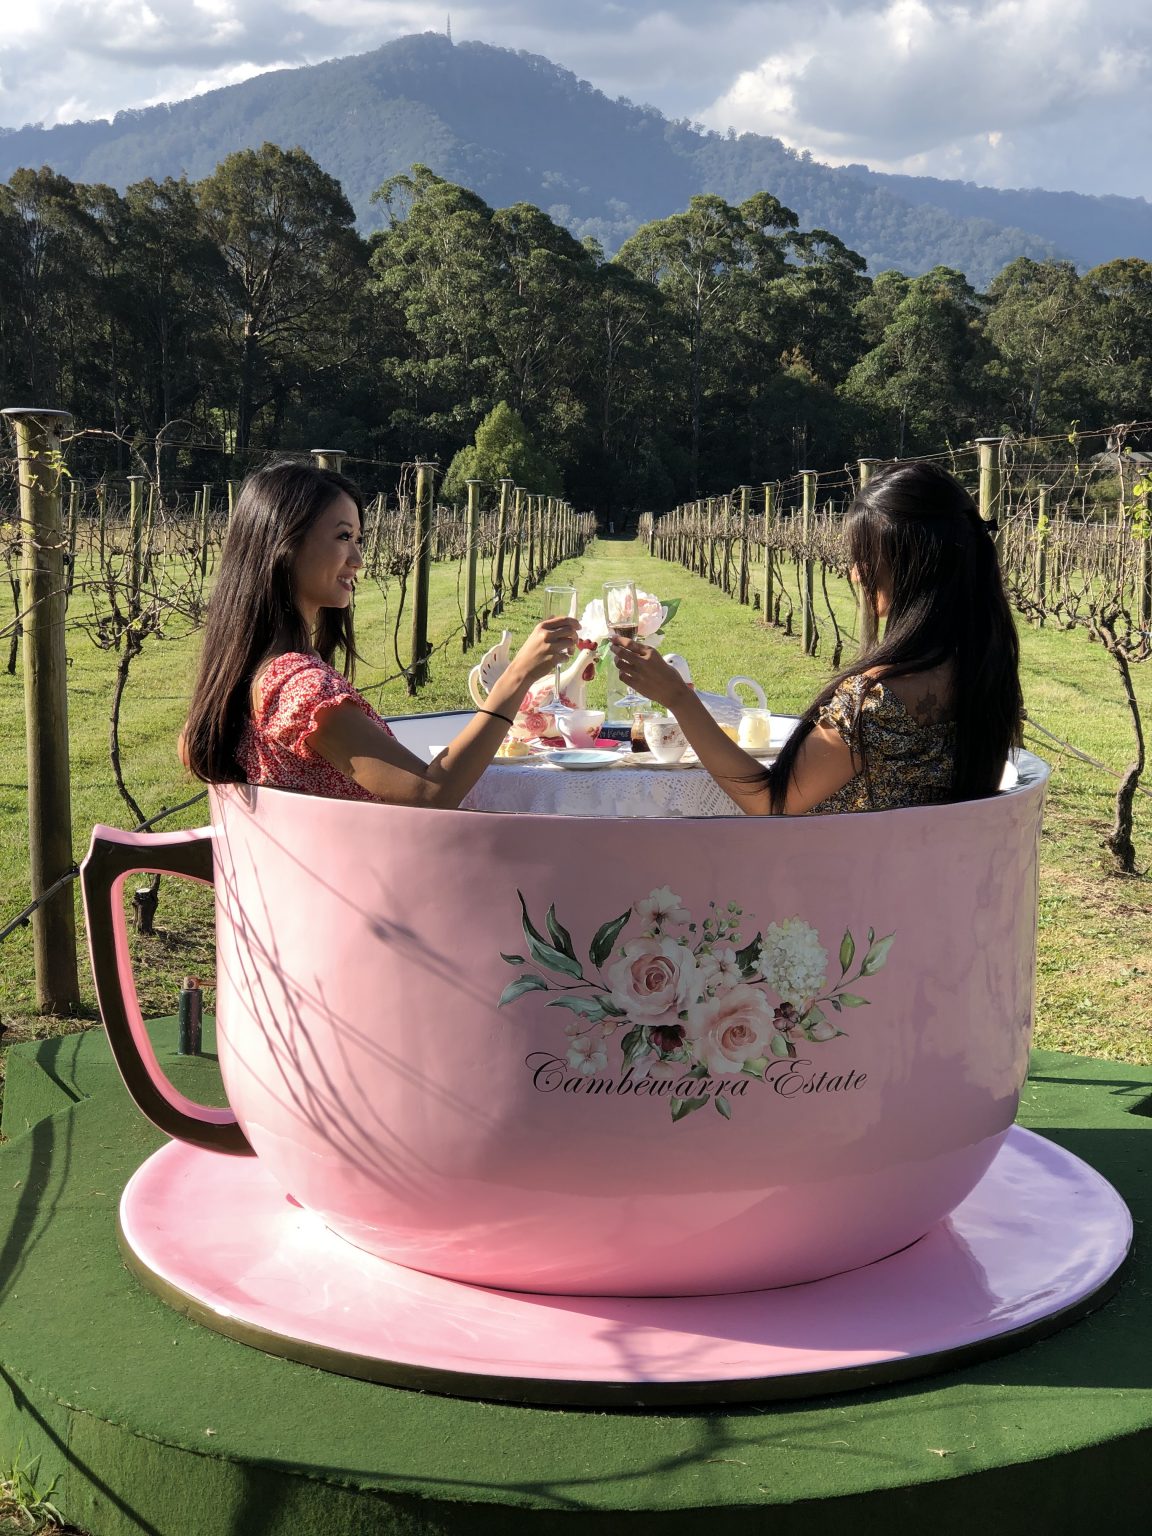 Try our amazing High Tea experience (or VIP High Tea) and taste our handcrafted High Tea menu and Estate Bubbles